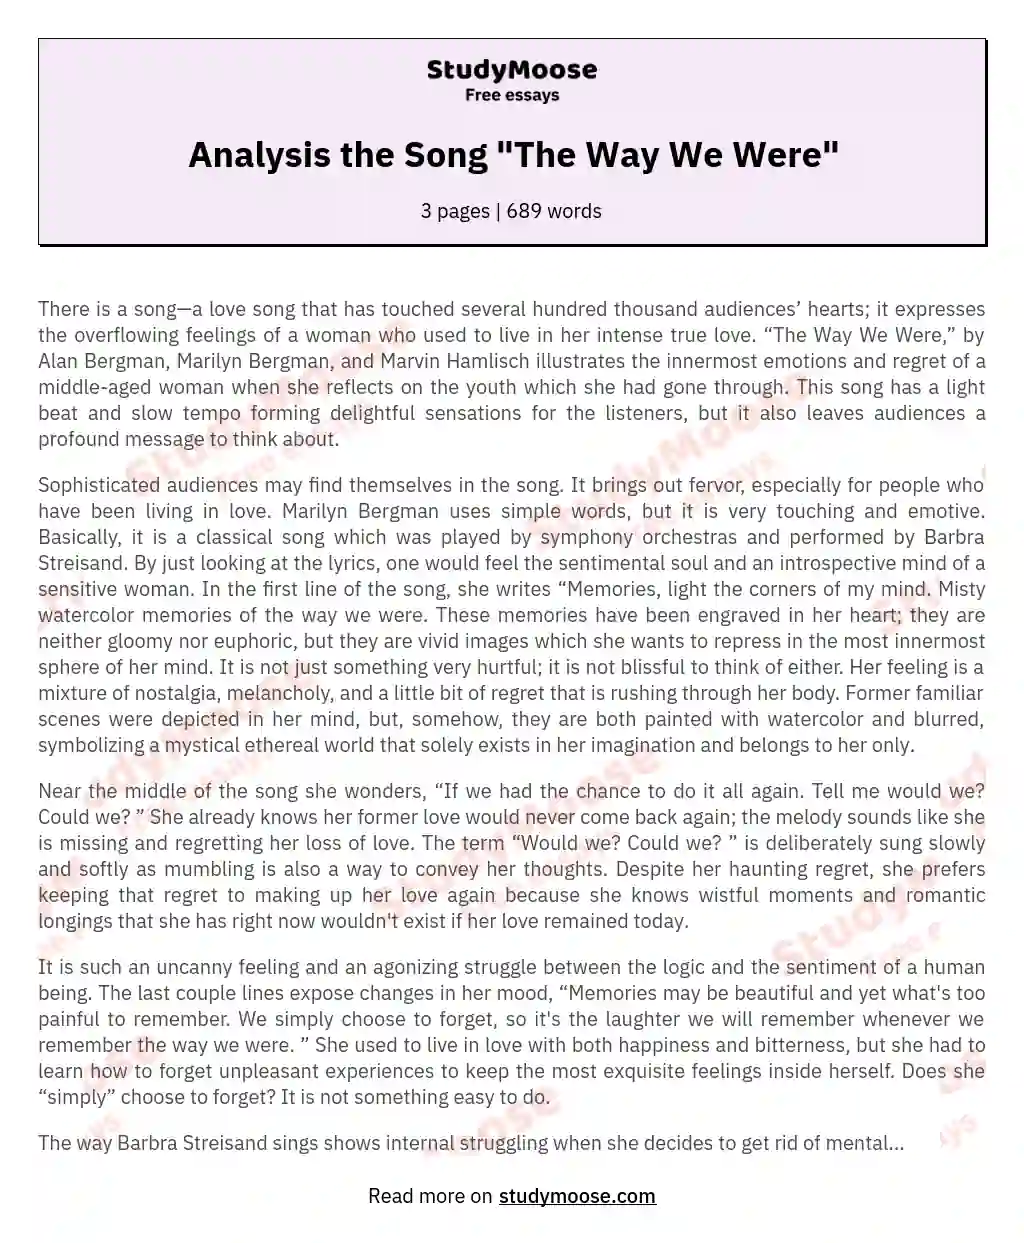 Analysis the Song "The Way We Were" essay